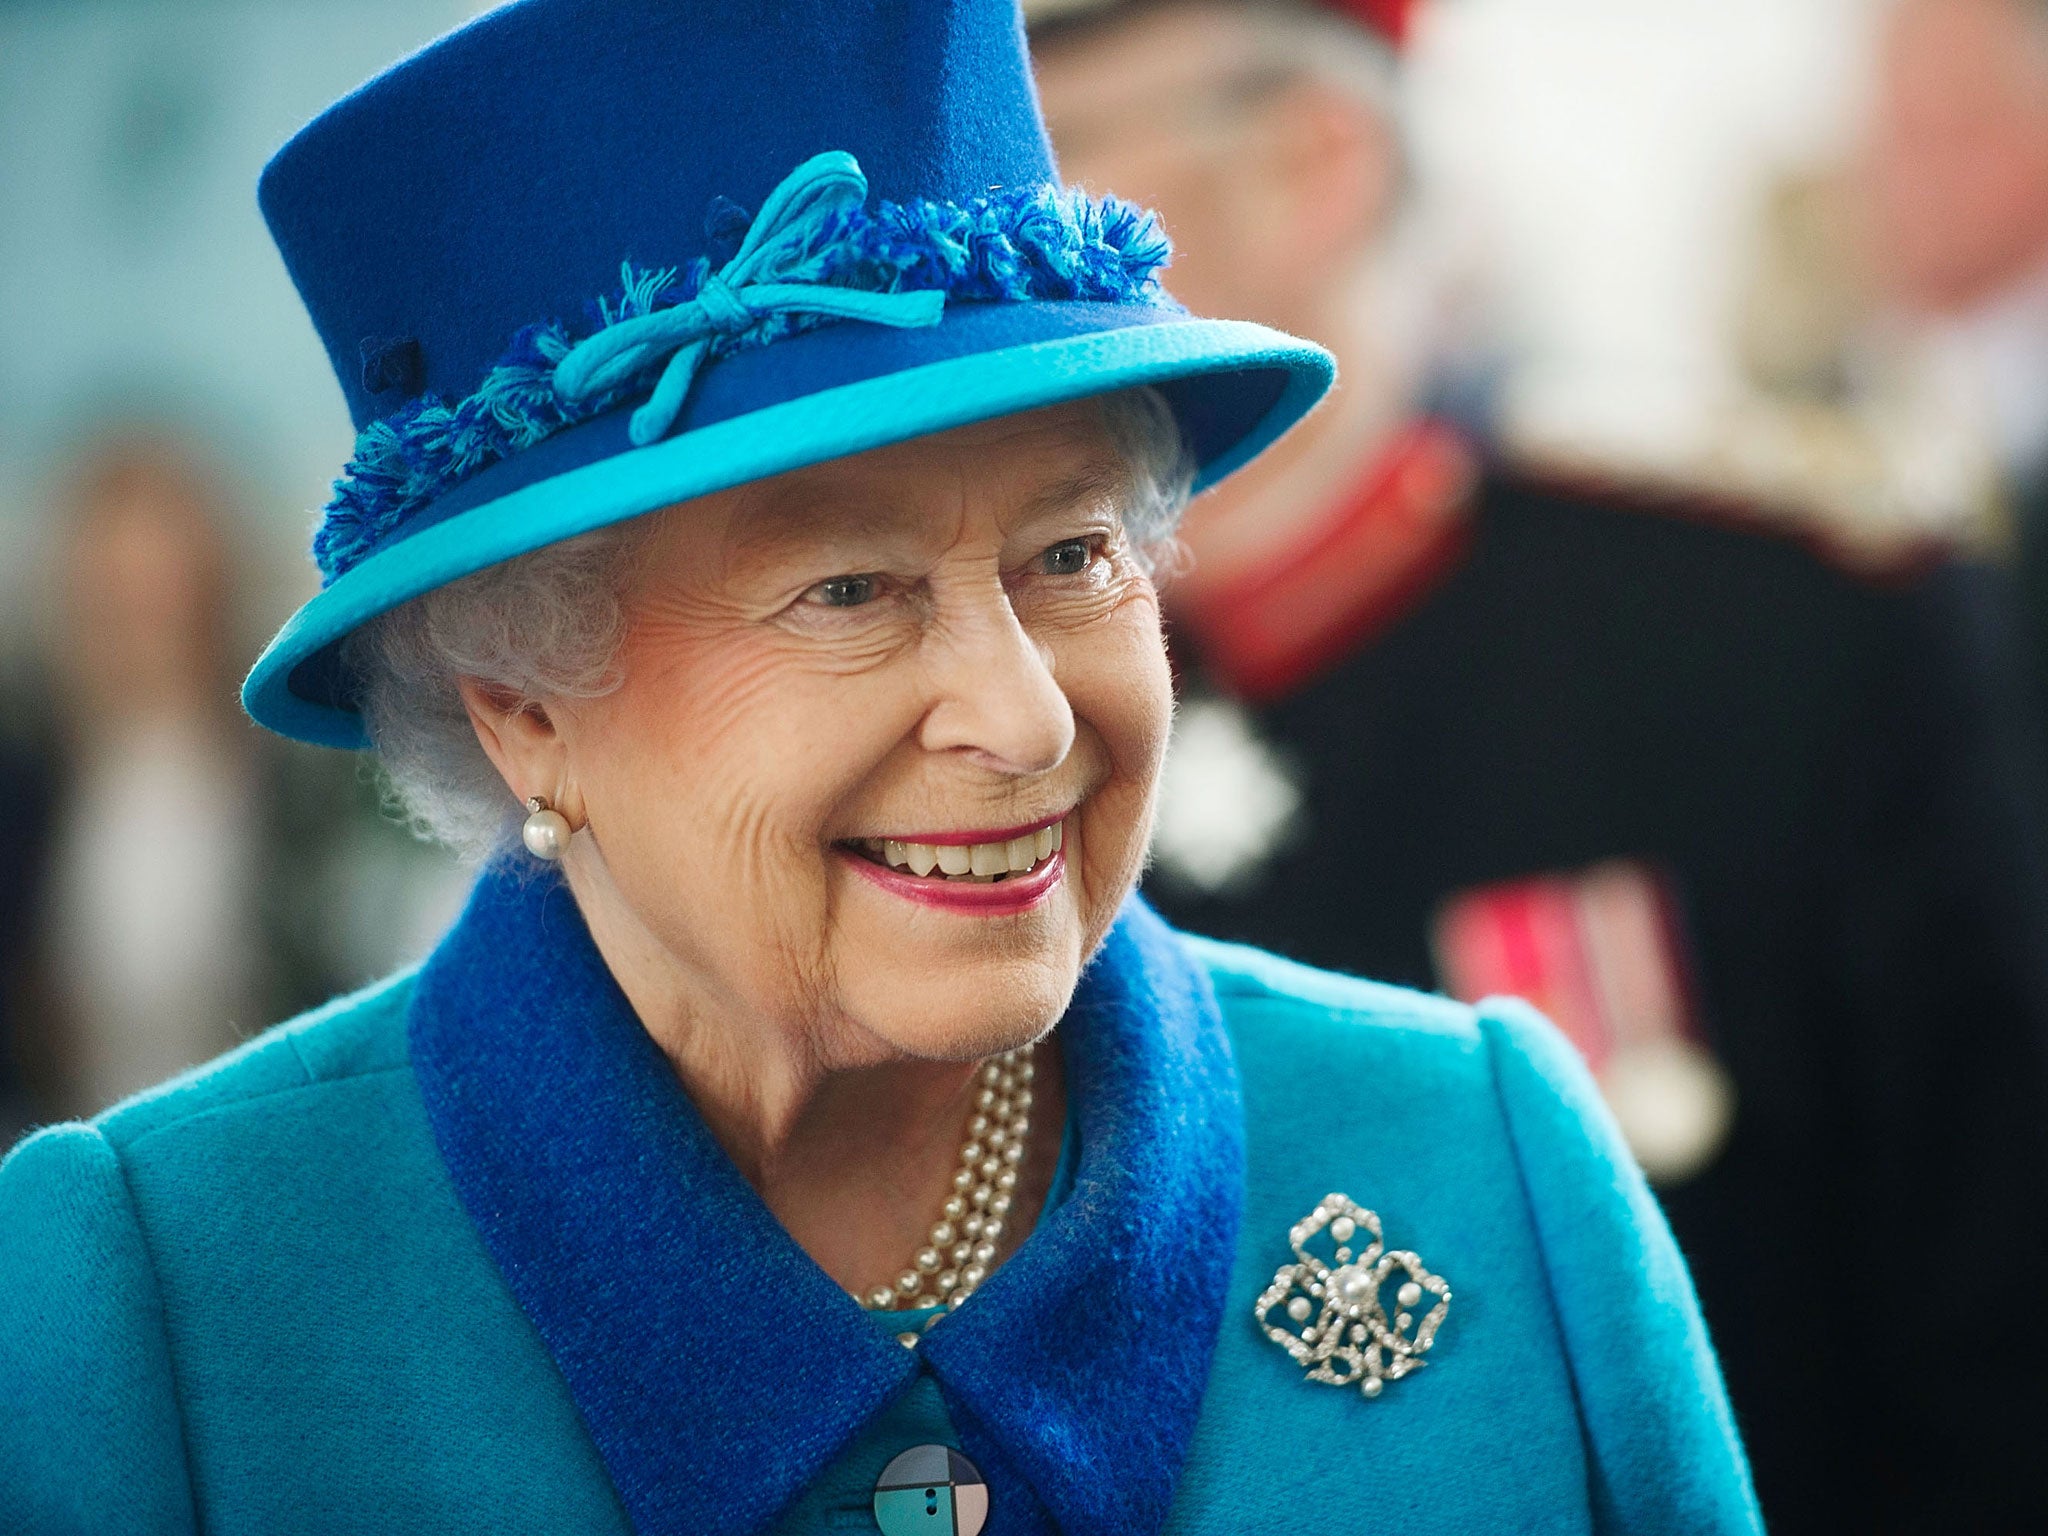 Since the Queen was born, average house prices have risen from £619 in 1926 to just shy of £300,000 today